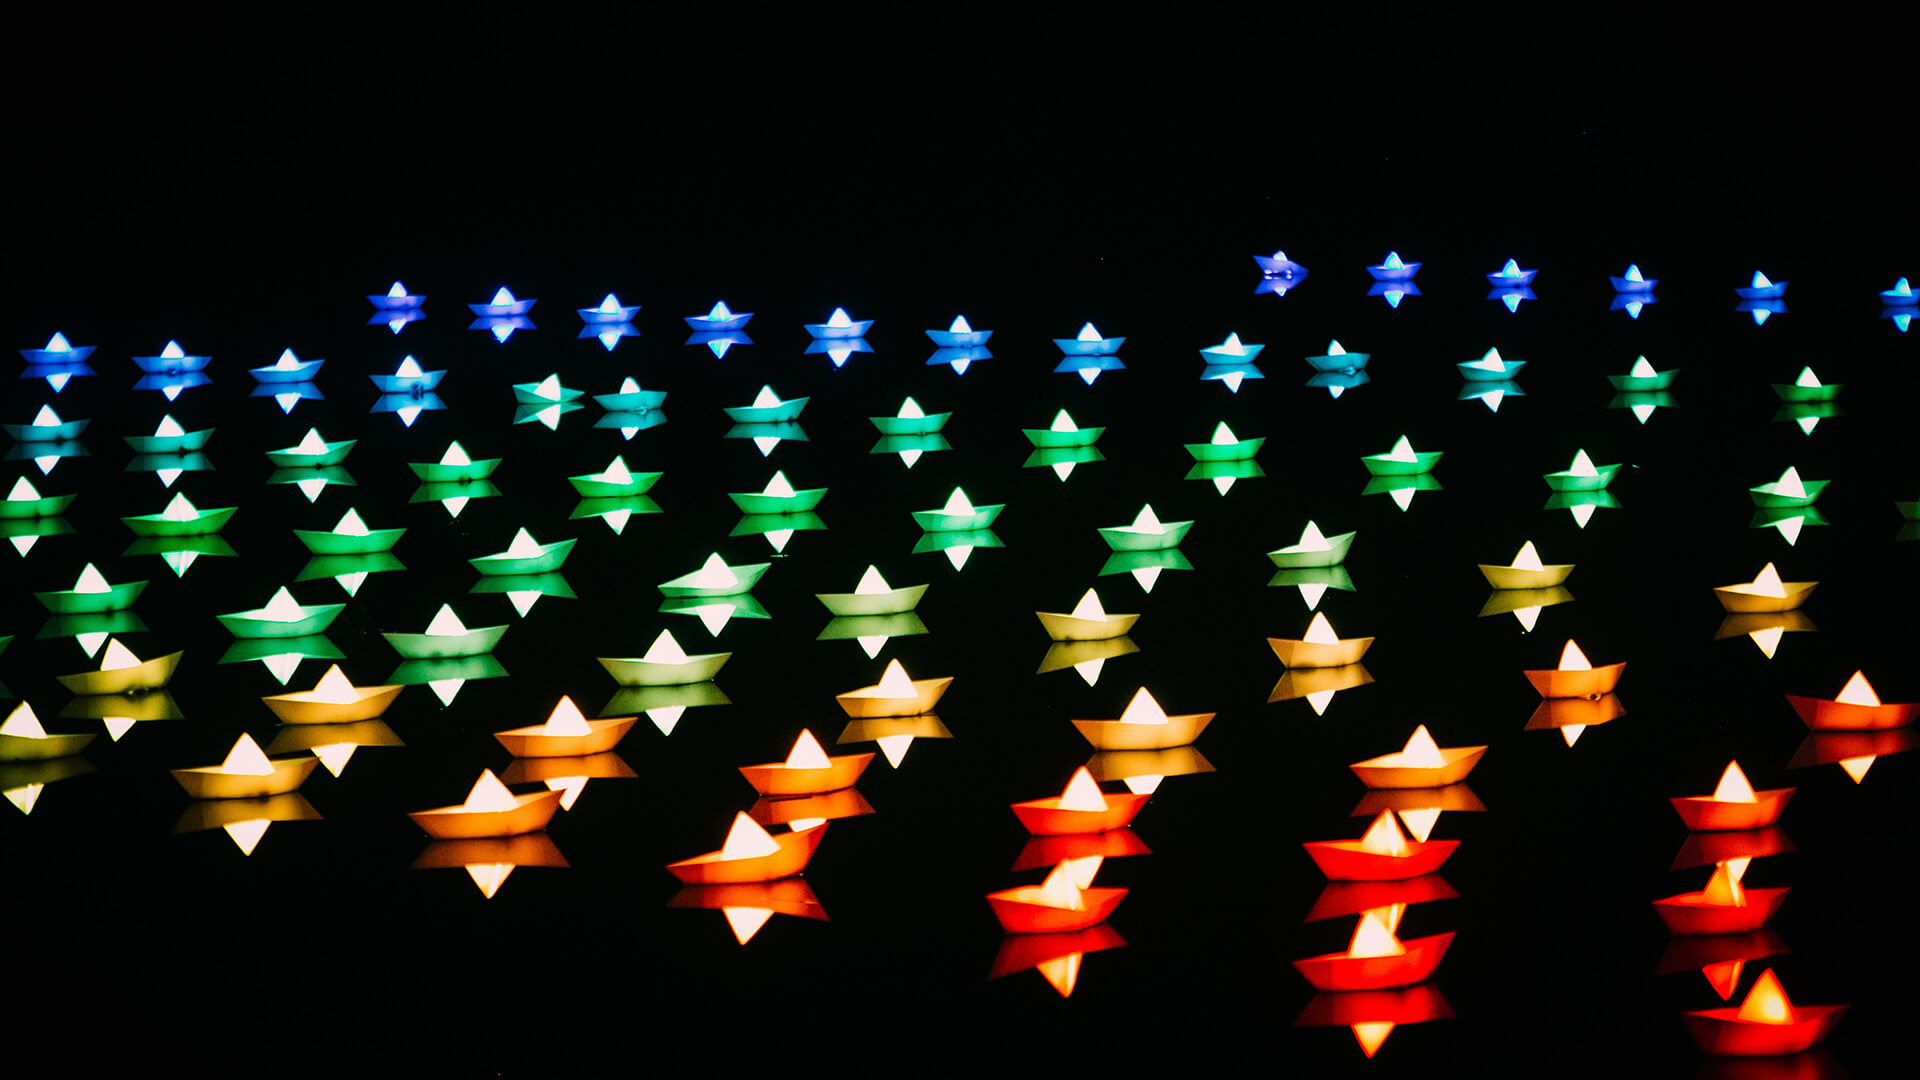 Blue, red, yellow and green paper boats in dark water. 